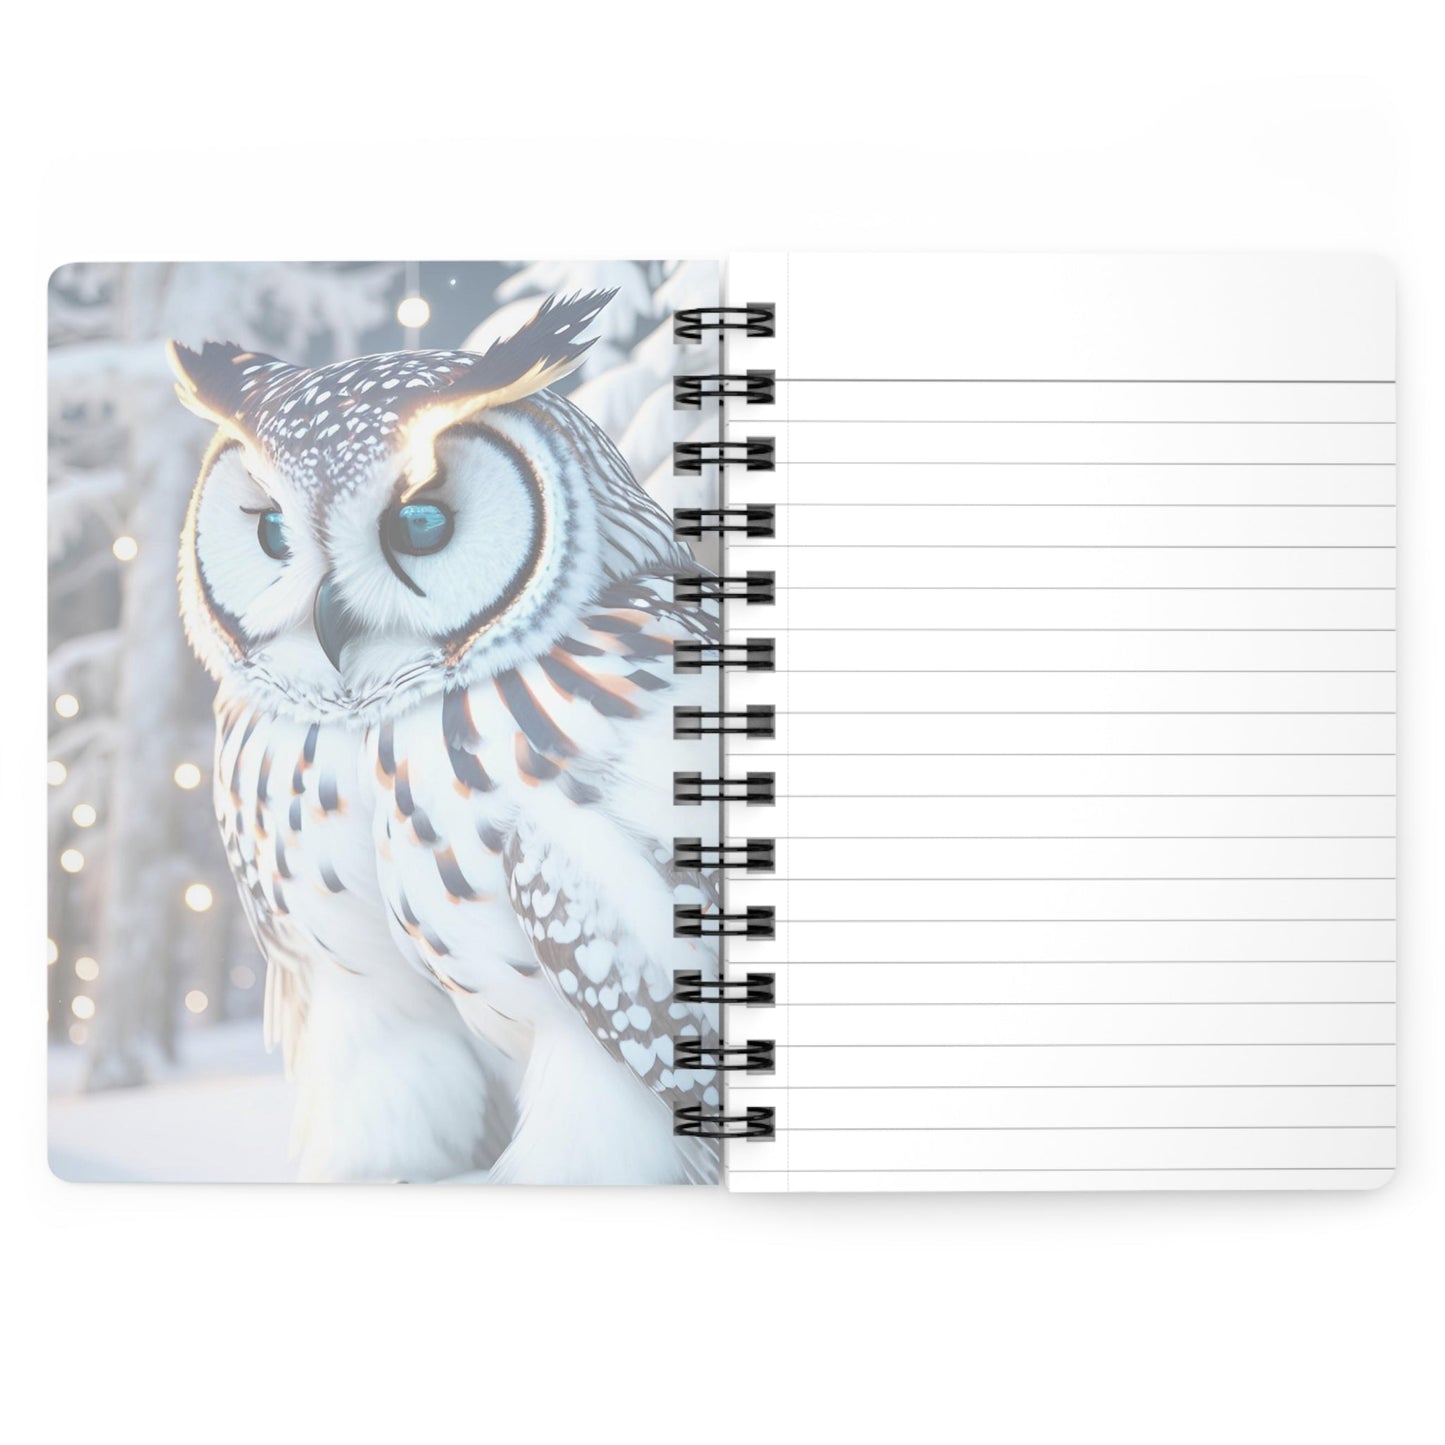 CrazyYetiClothing, CYC, Snowy Owl (Spiral Bound Journal), Paper products